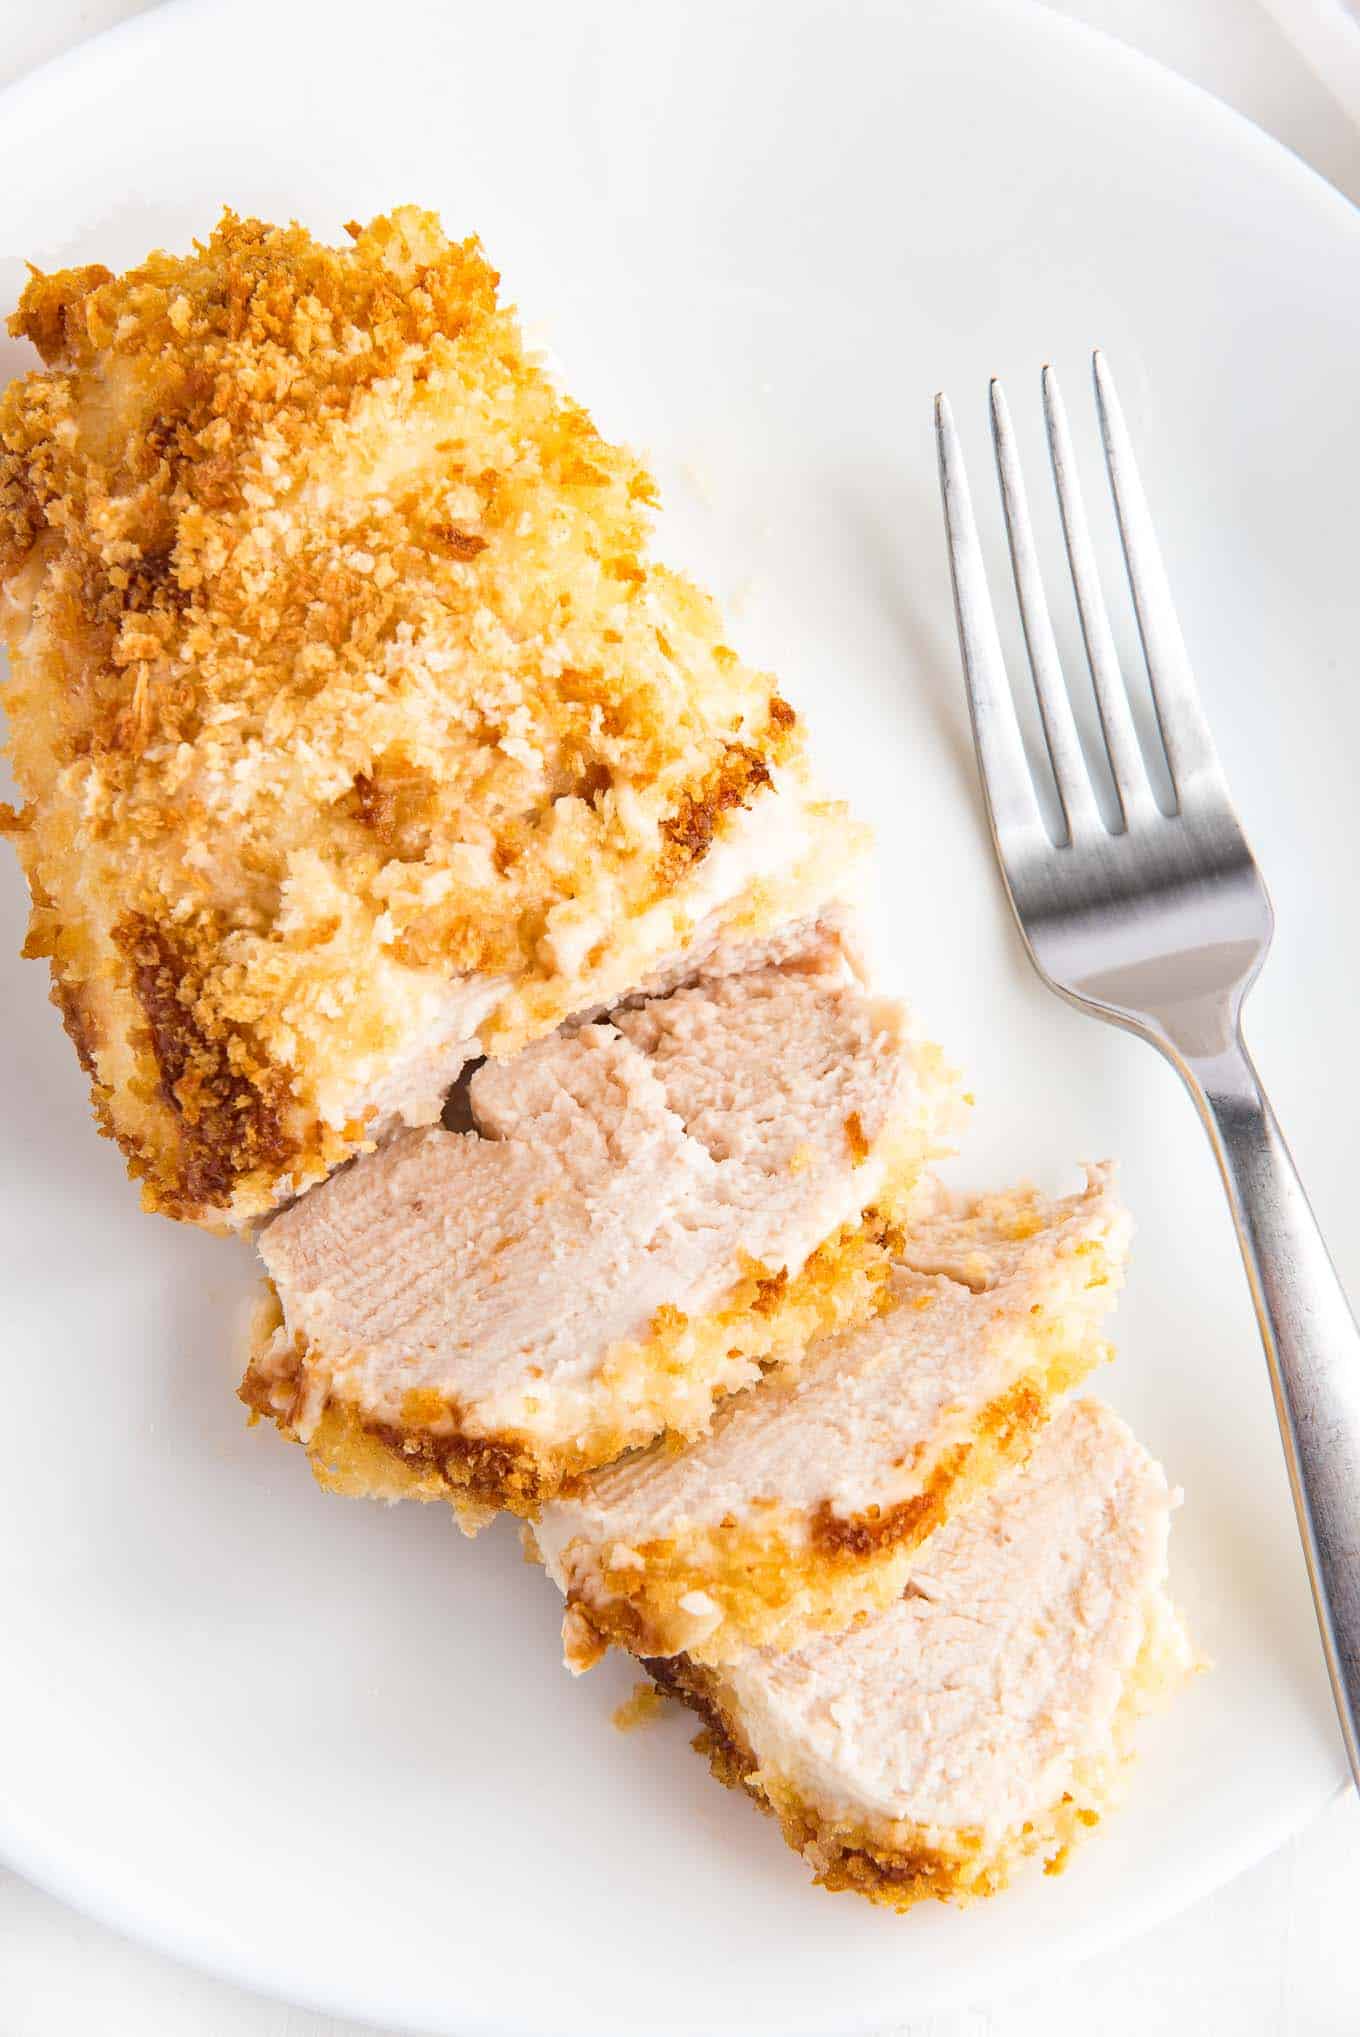  A piece of crispy panko chicken on a plate with a fork to the side.